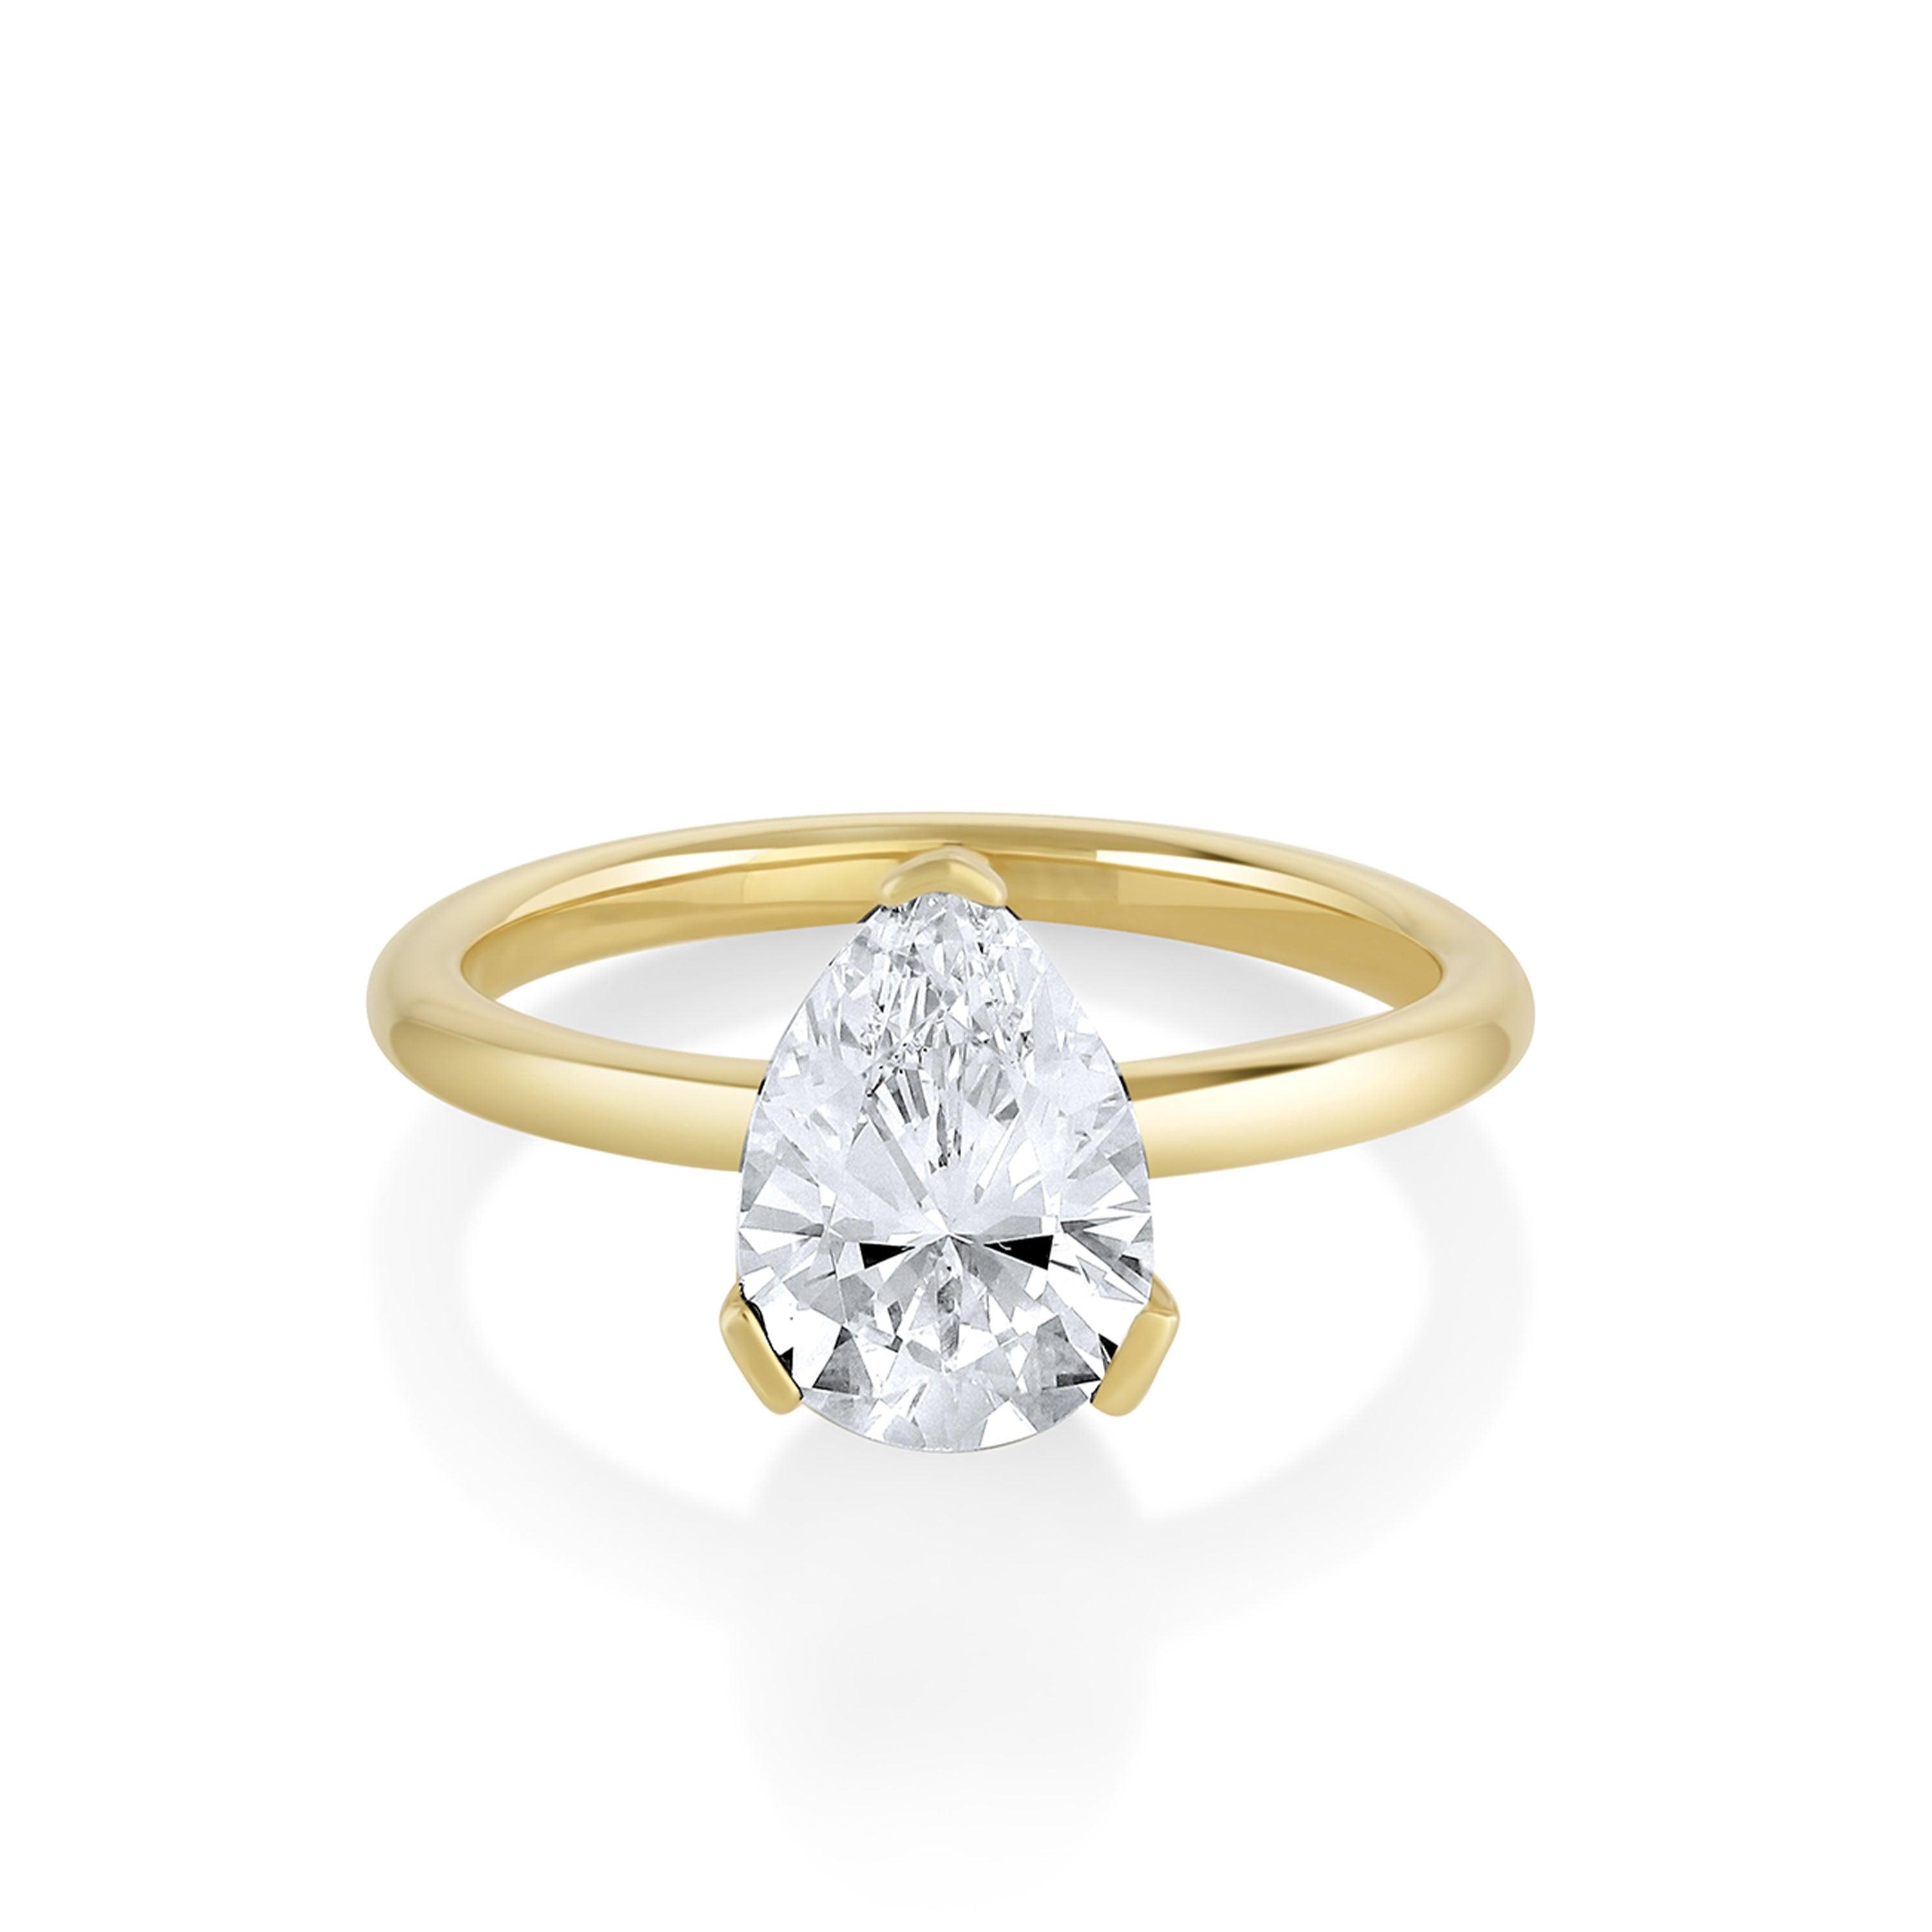 Marrow Fine Jewelry Sloane White Diamond Pear Solitaire Engagement Ring